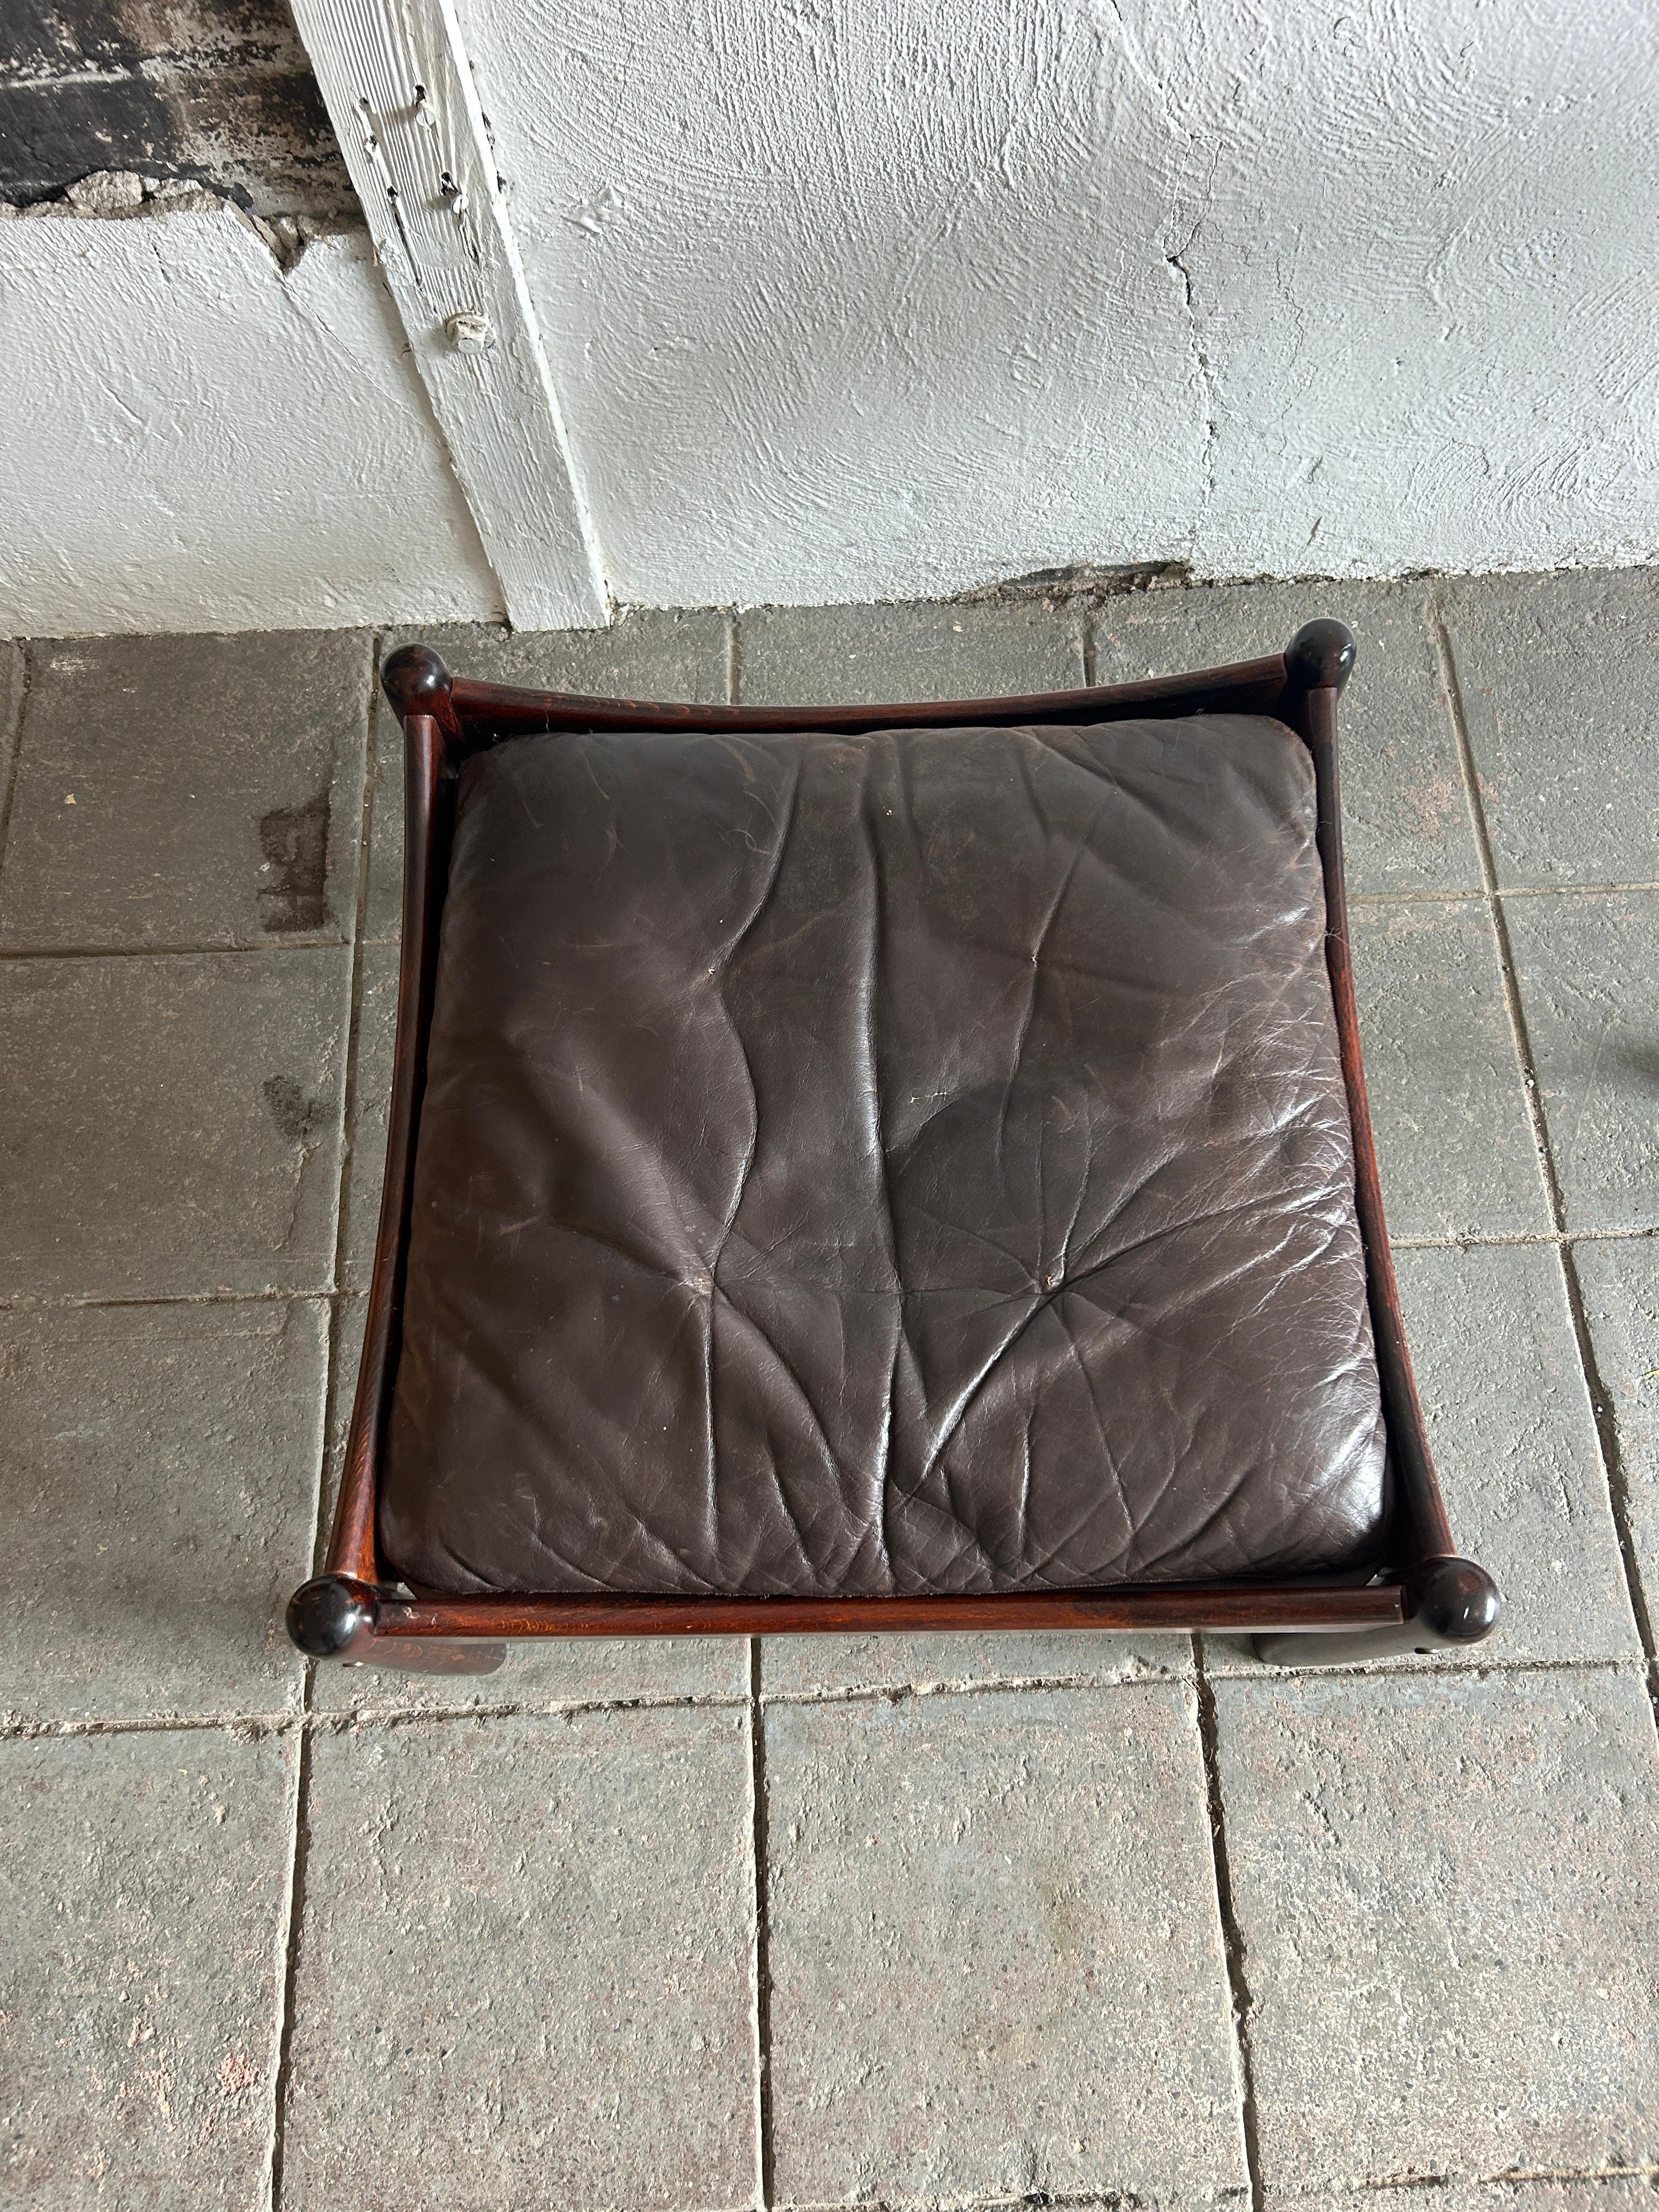 Mid century Scandinavian brown leather rosewood ottoman Norway. Brown leather cushion with rosewood legs and frame. Labeled made in Norway. Located in Brooklyn NY.

Measures 24” x 24” x 13” high